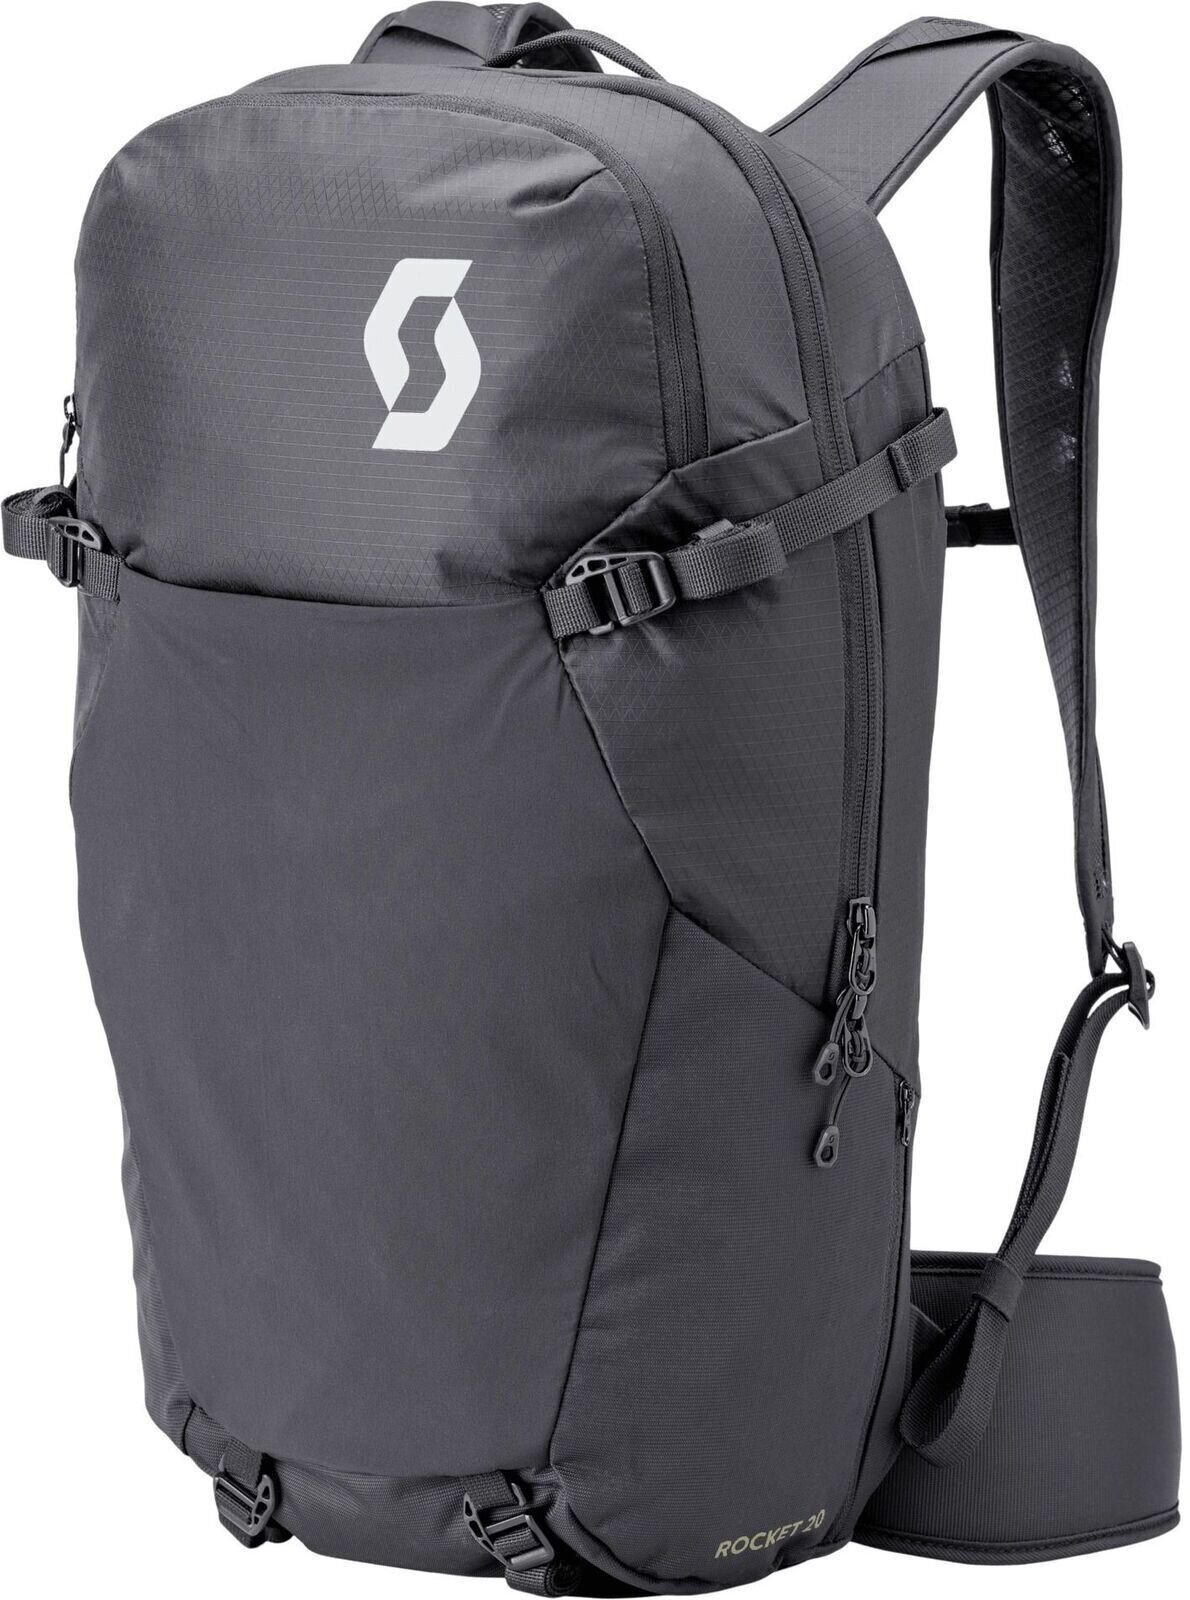 Cycling backpack and accessories Scott Trail Rocket 20 Backpack Black Backpack